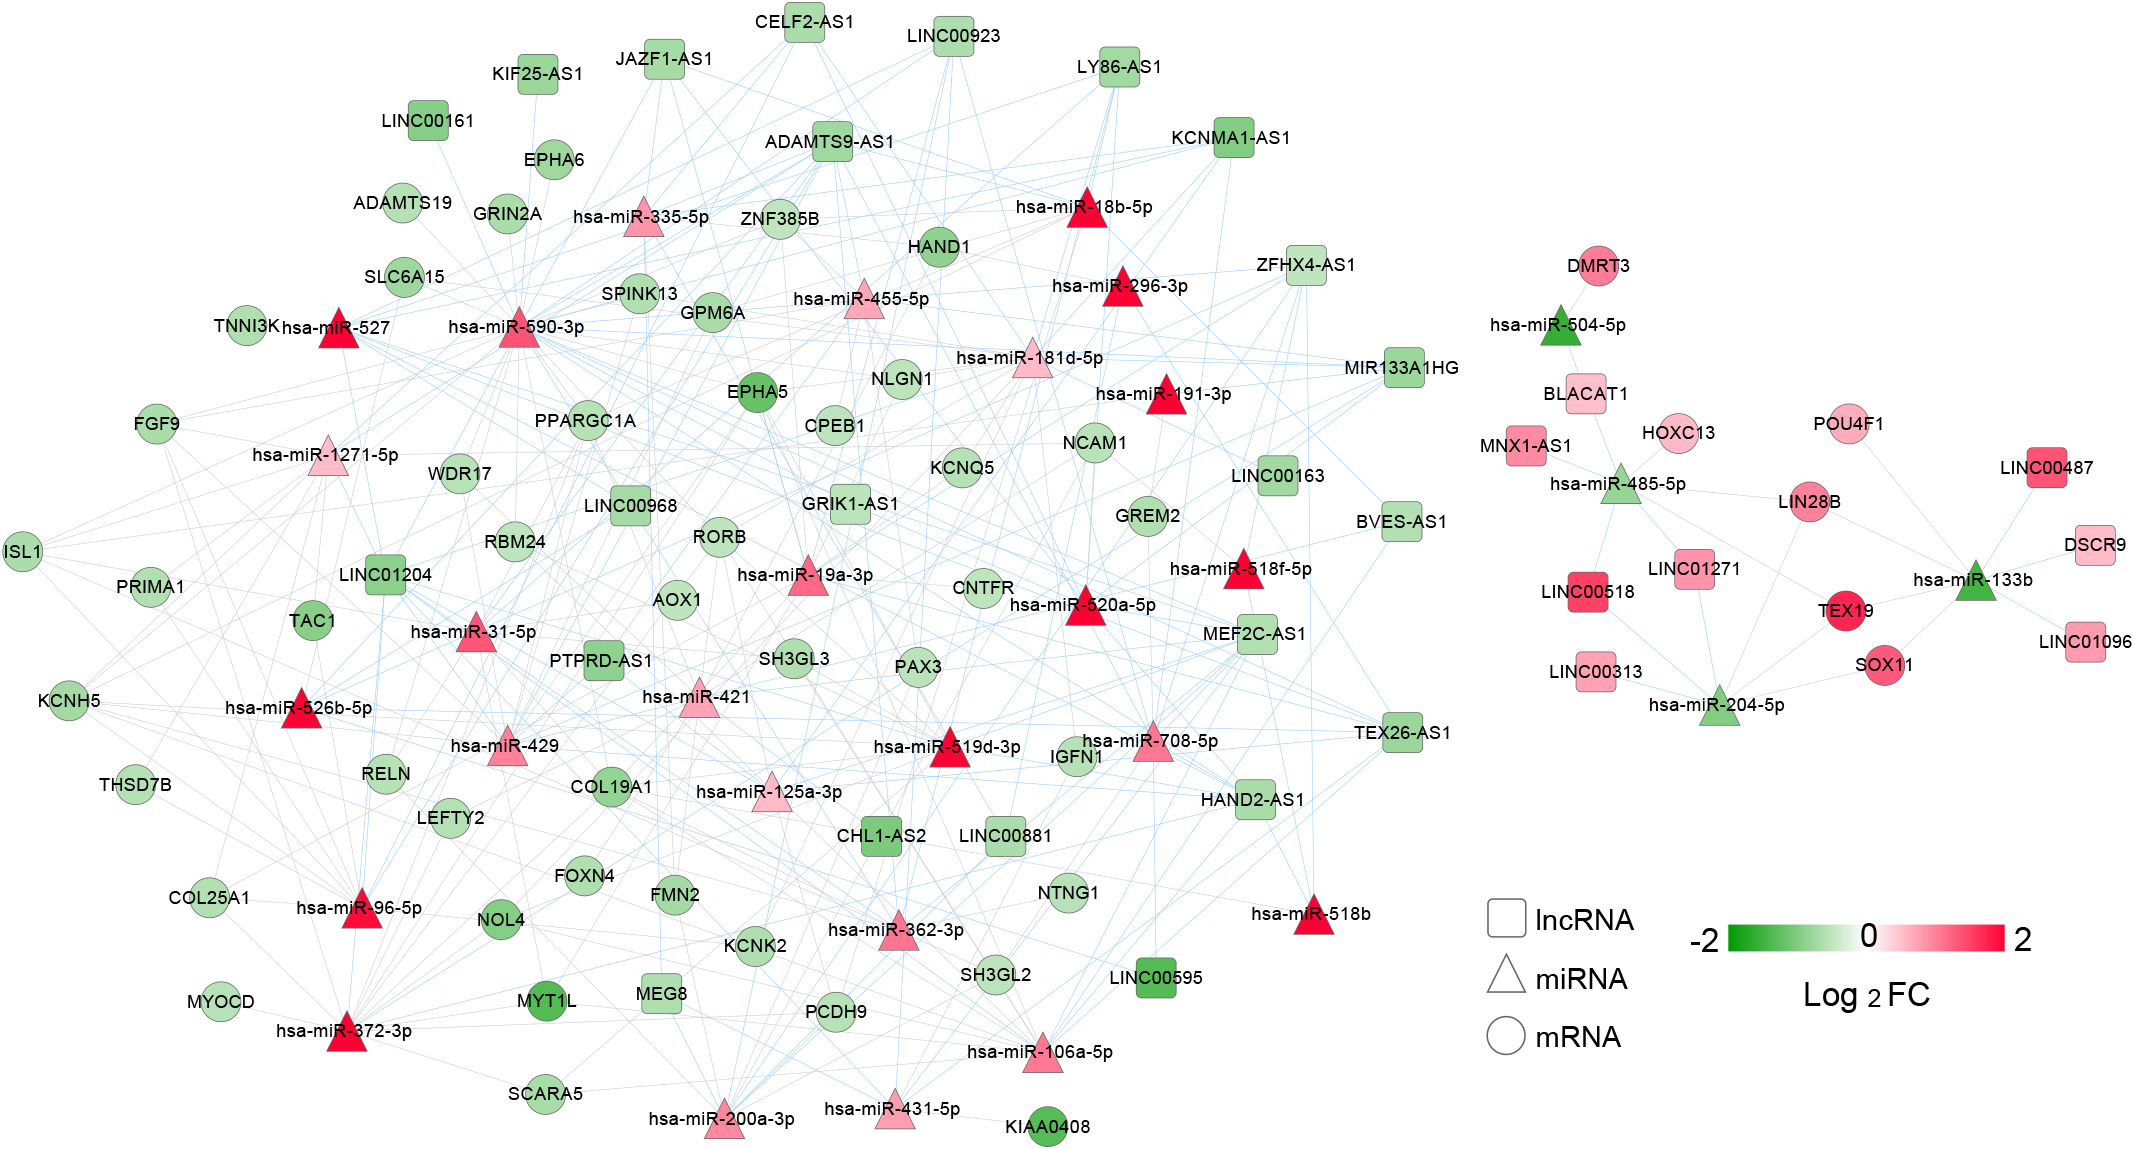 ceRNA regulatory network. Differentially expressed lncRNAs (DElncRNAs) were showed by the represented squares; the triangles showed differentially expressed microRNAs (DEmiRNAs) while differentially expressed mRNA (mRNA) were shown by the circles; the color key represented the log2FC. The red connecting lines represented the DElncRNA-DEmiRNA, while the gray connecting lines represented the DEmiRNA-DEmRNA regulatory connection.